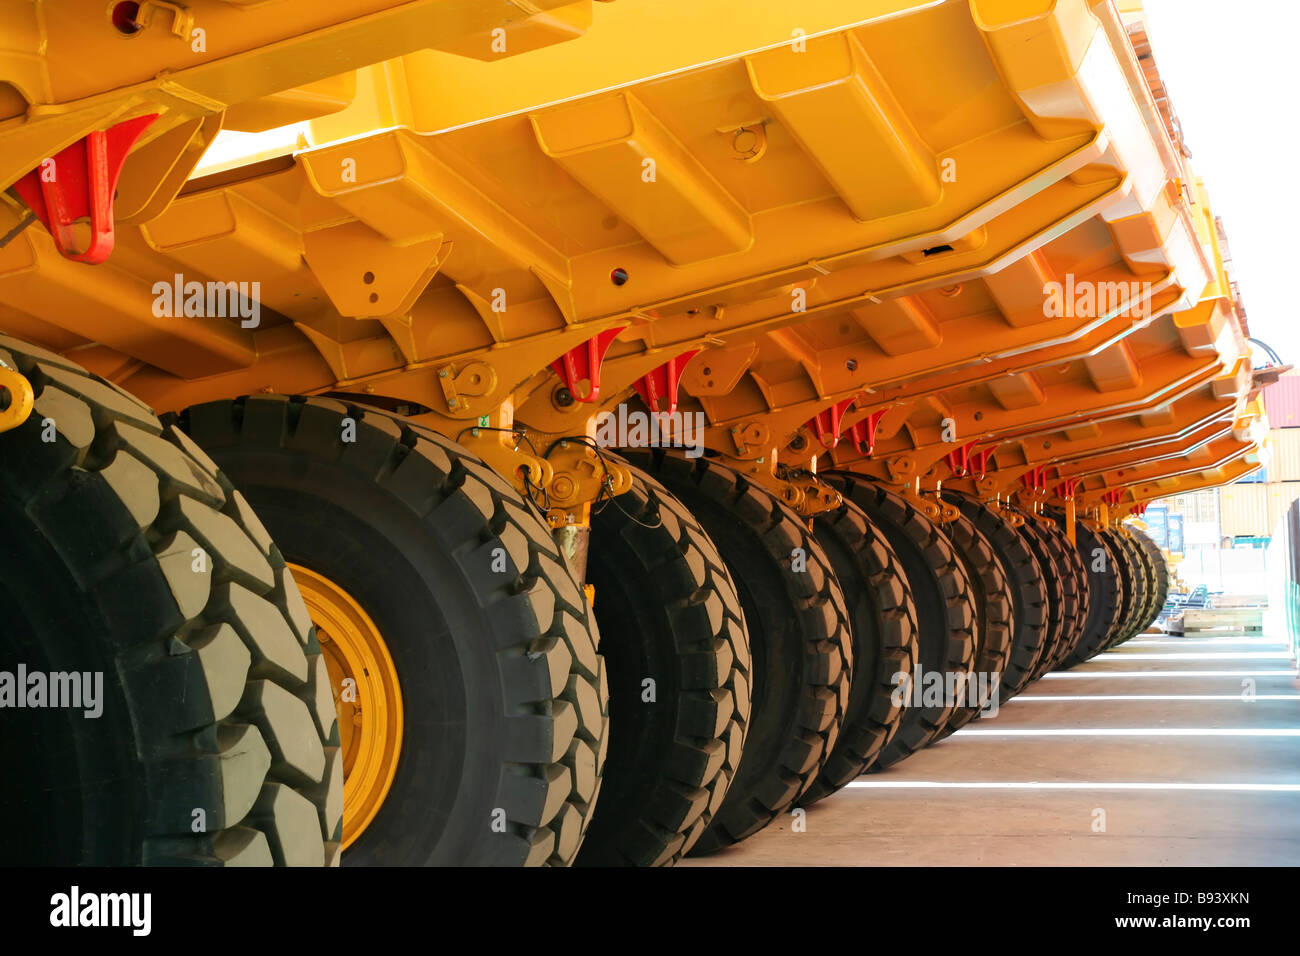 rear view or bottom of caterpillar articulated off highway dump truck neatly parked in repetitive pattern Stock Photo